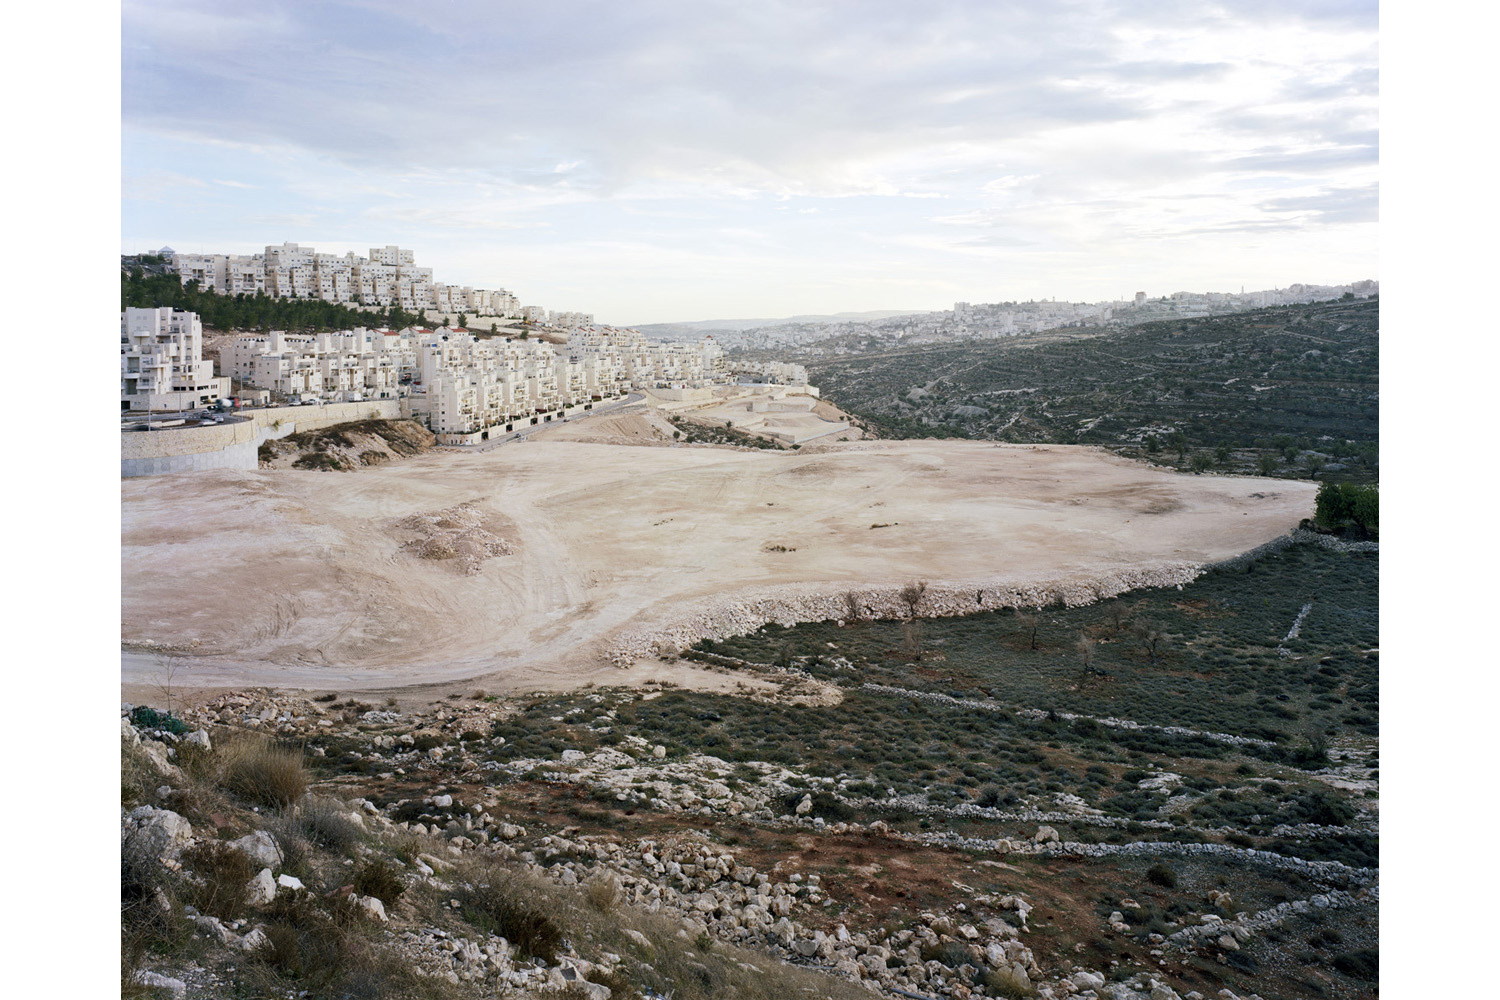 Photograph by Thomas Struth